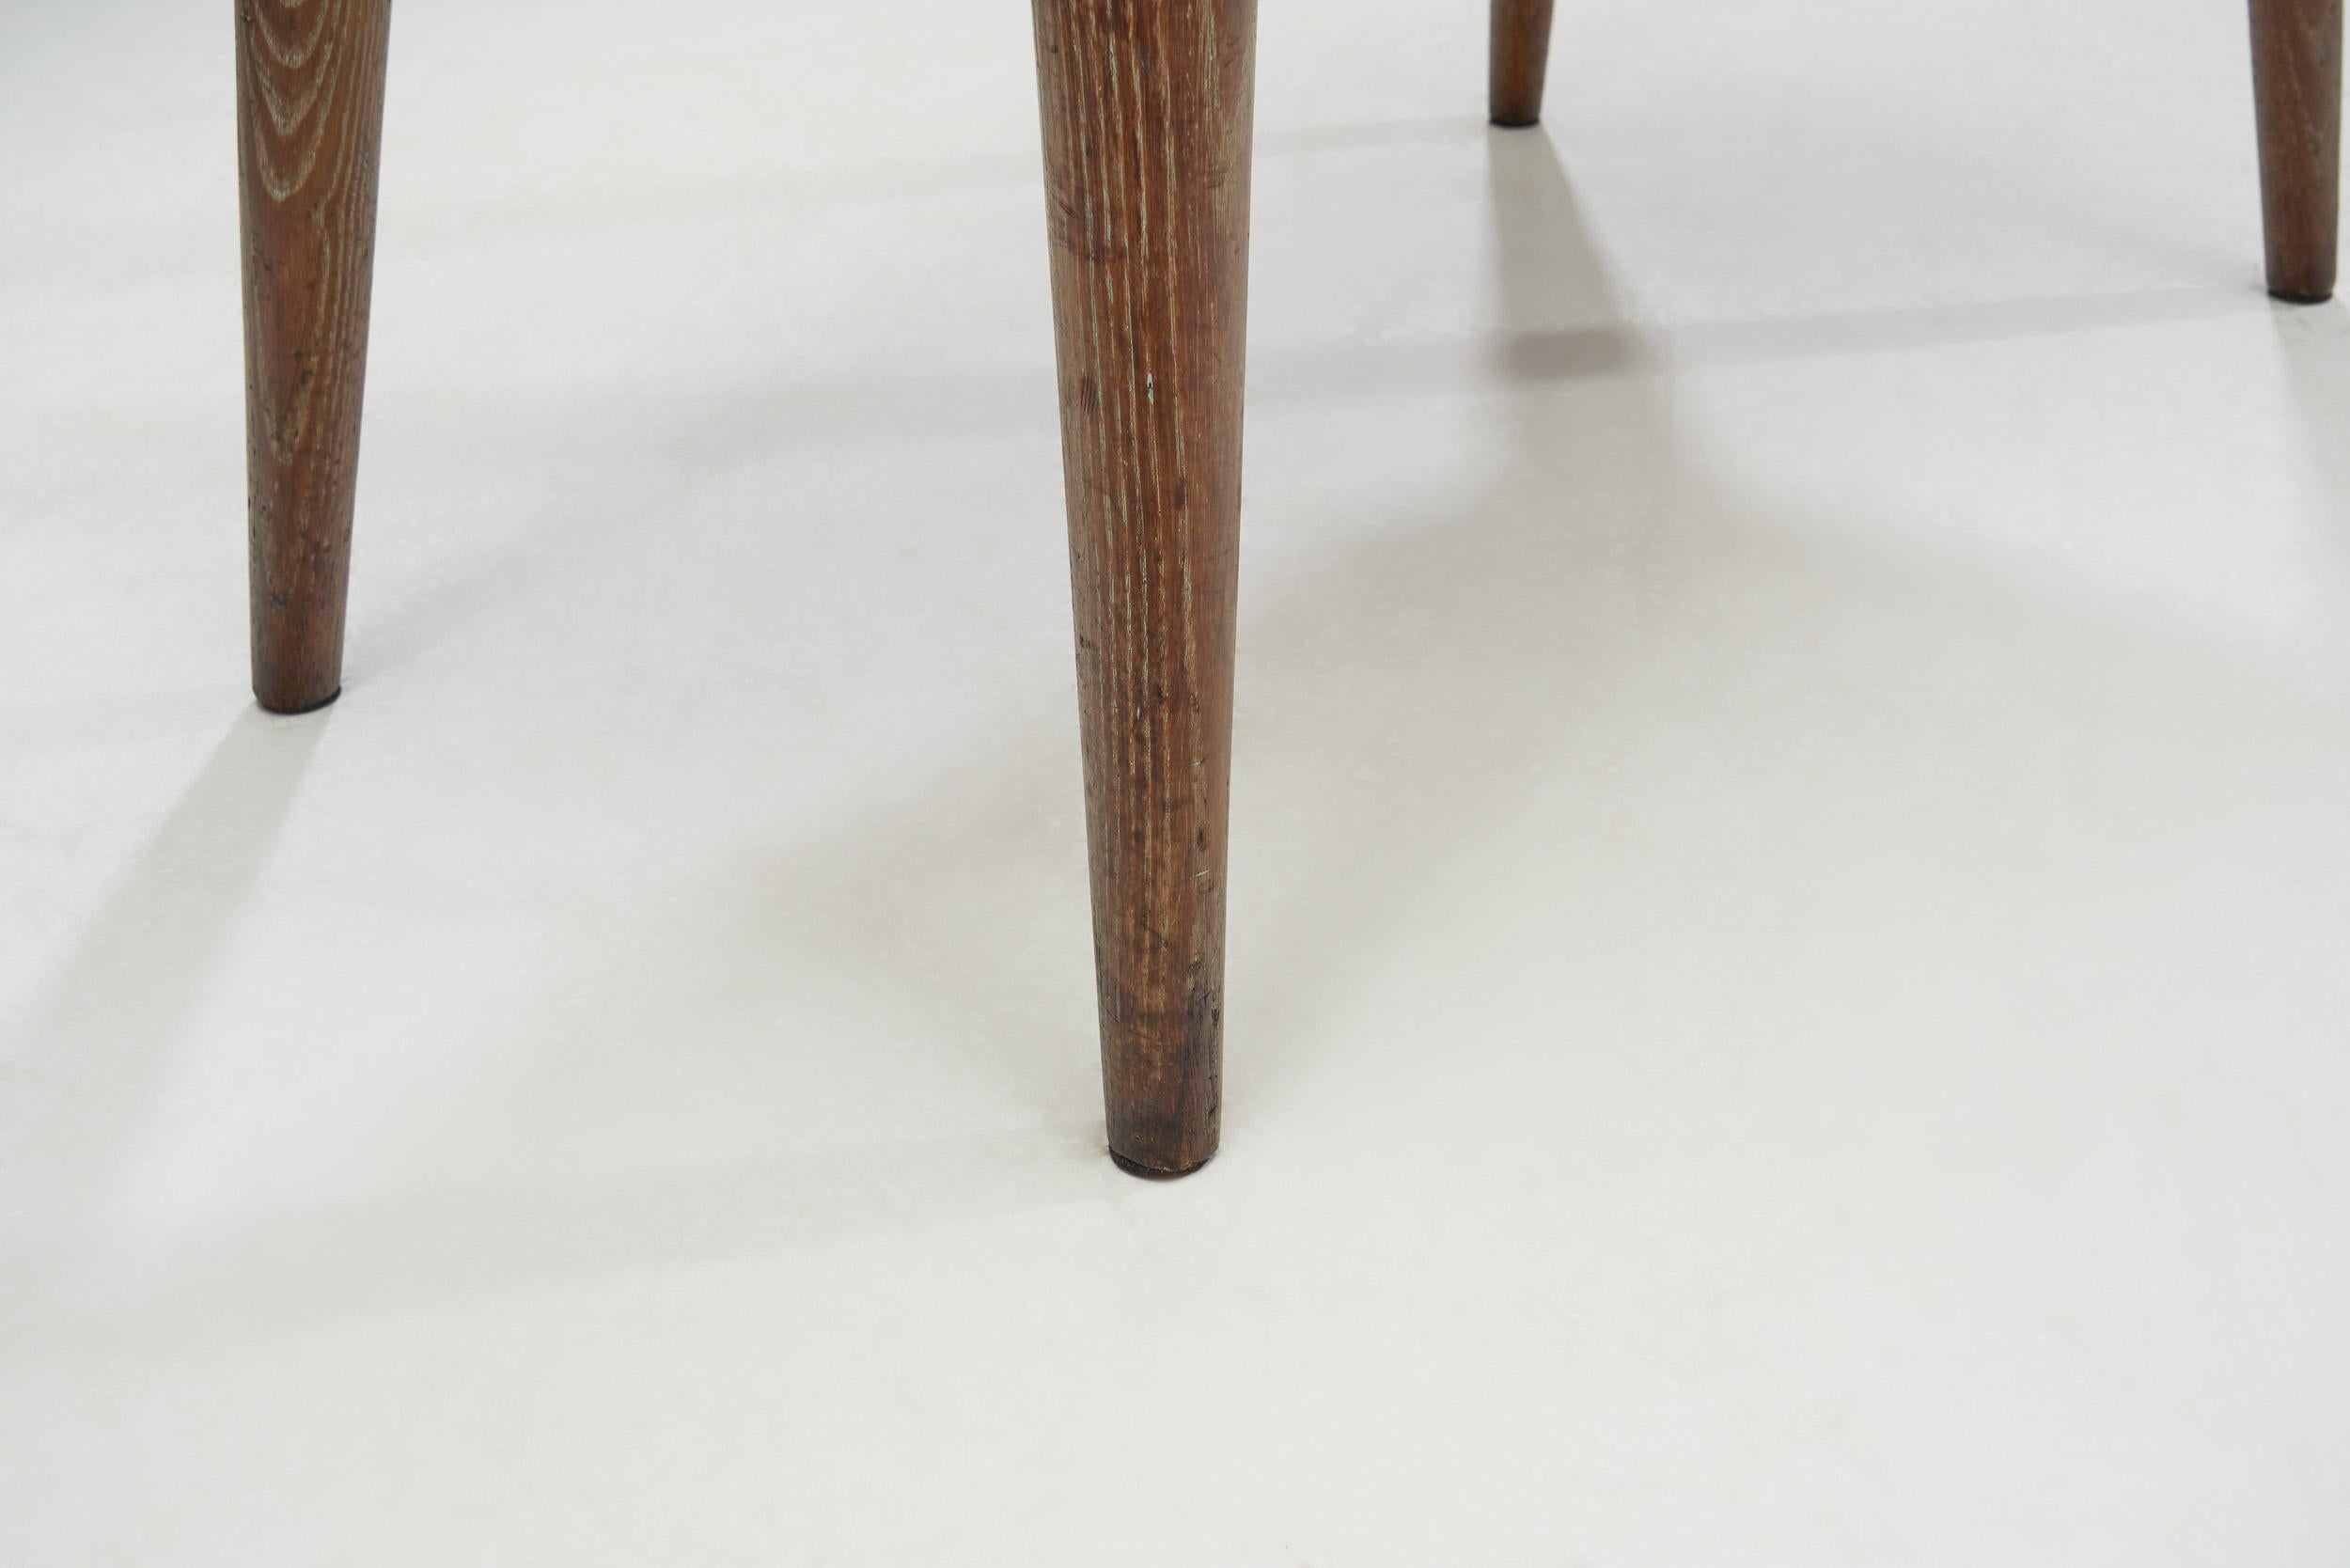 Artisan Wood Side Table with Decorative Carved Legs, Europe 1950s For Sale 10